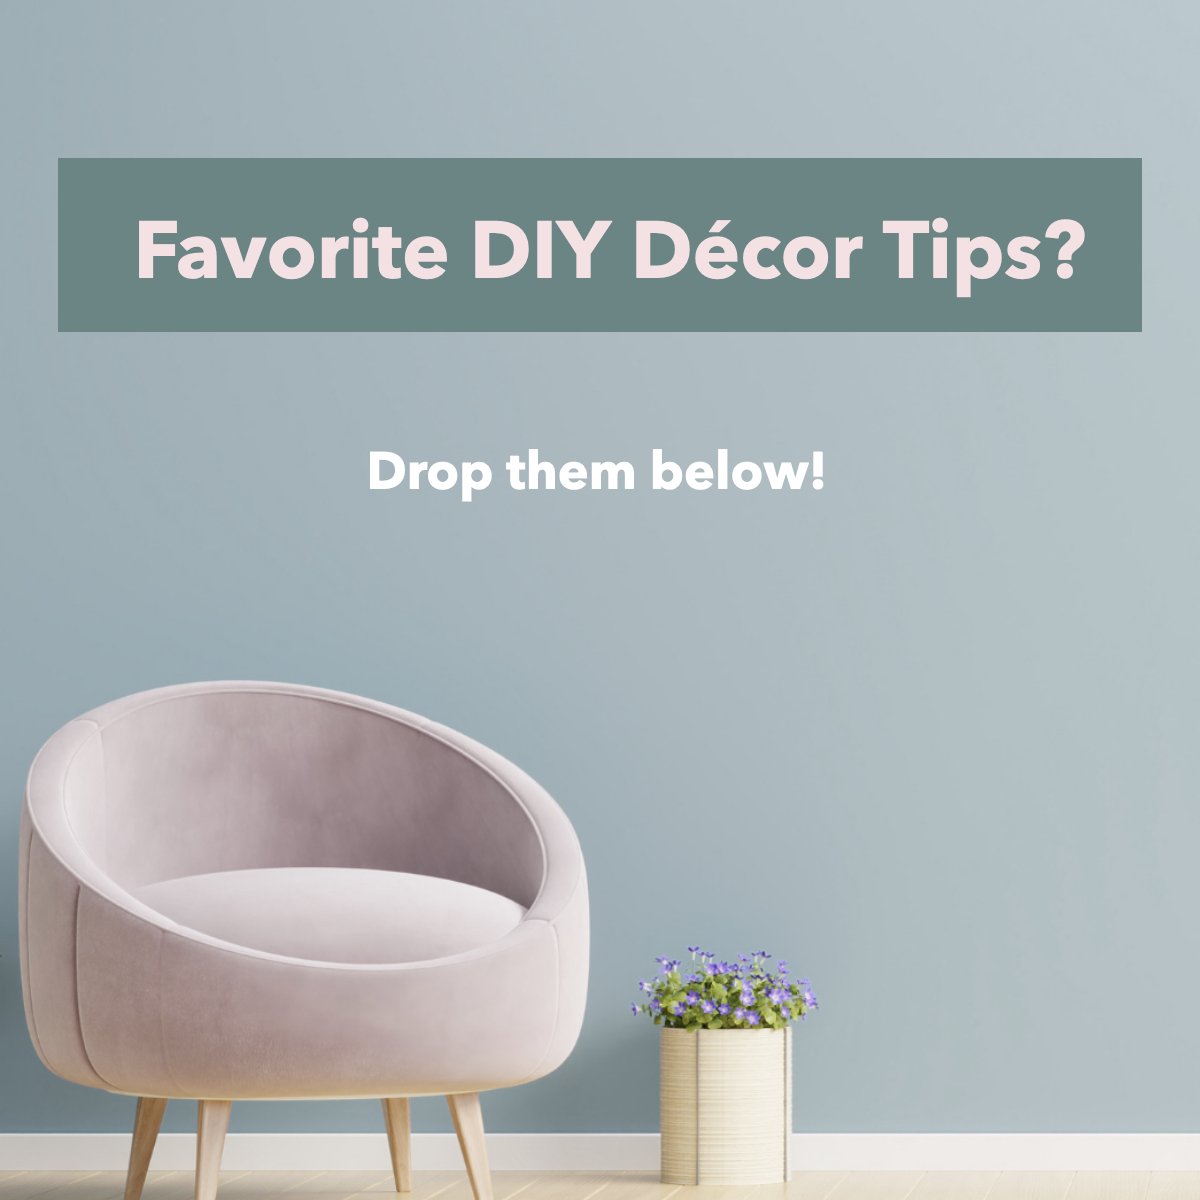 We want you to share your tips with us!!!

Drop them in the comments 💭! 

#DIY #Question #Interiordesign #designtips #DIYdecor
 #francinesellsbaldwin #eliterealestatesolutions #buyinbaldwin #findyoursweethomealabama